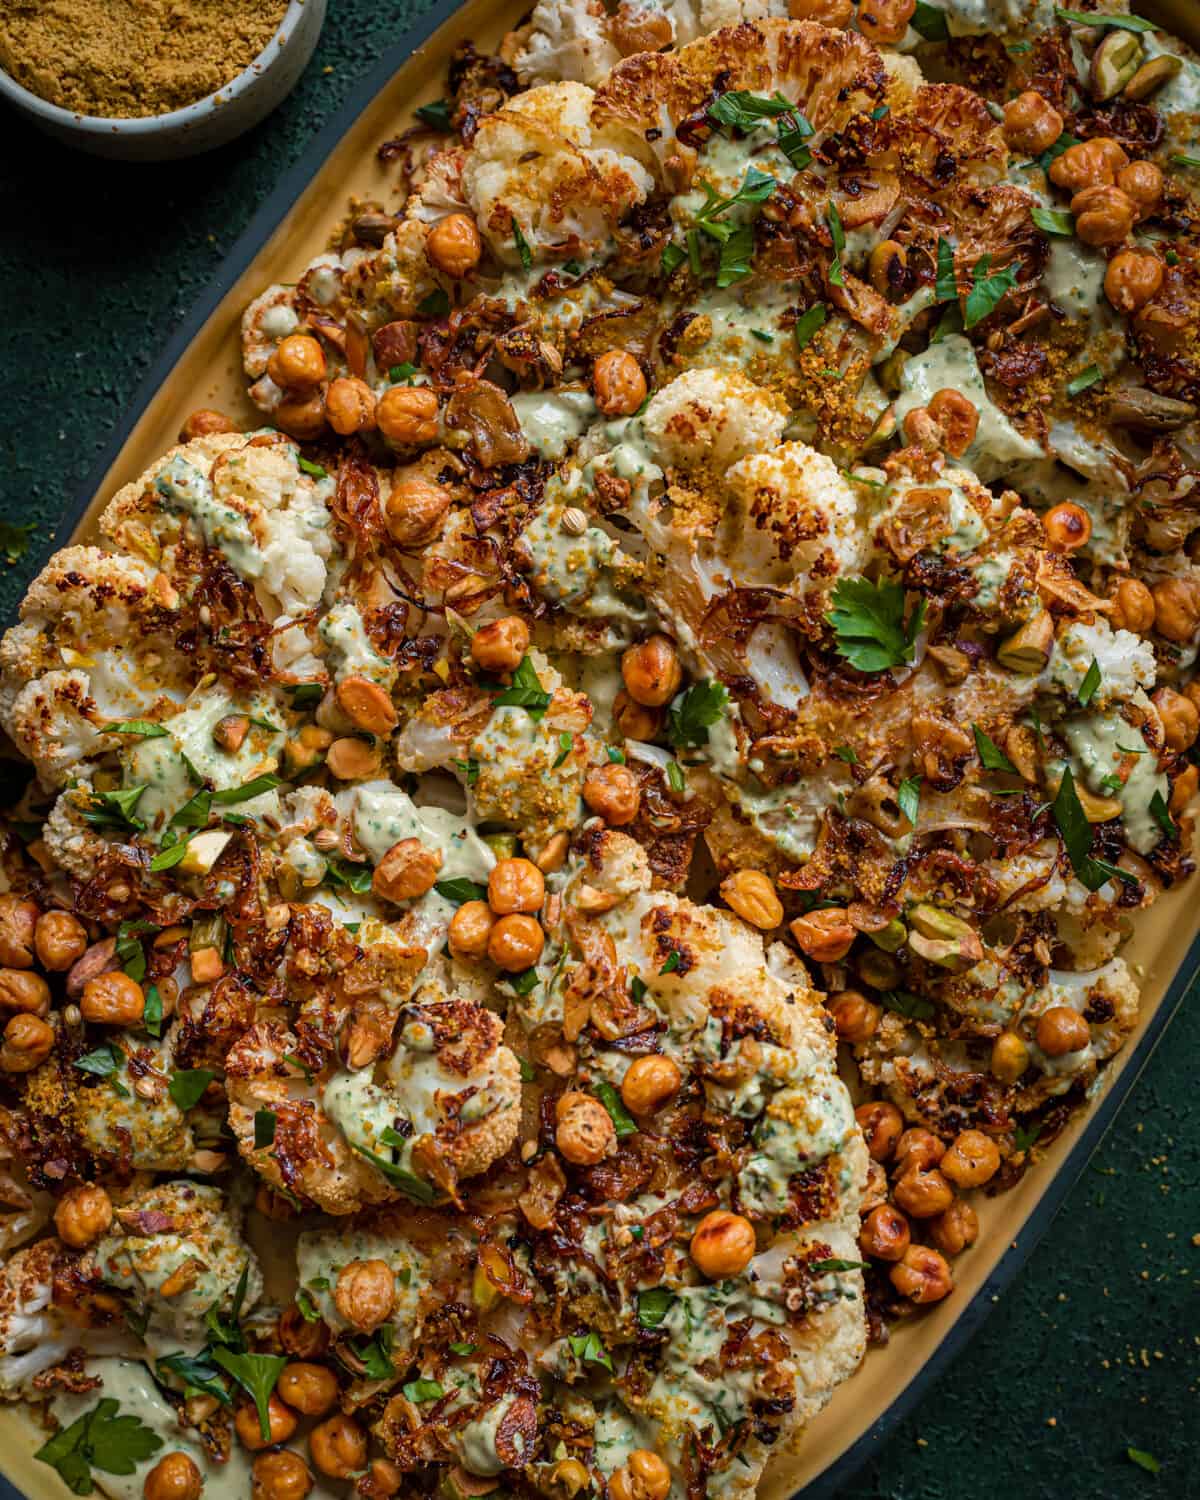 roasted cauliflower steaks and chickpeas with caramelized shallots and tahini sauce on yellow tray